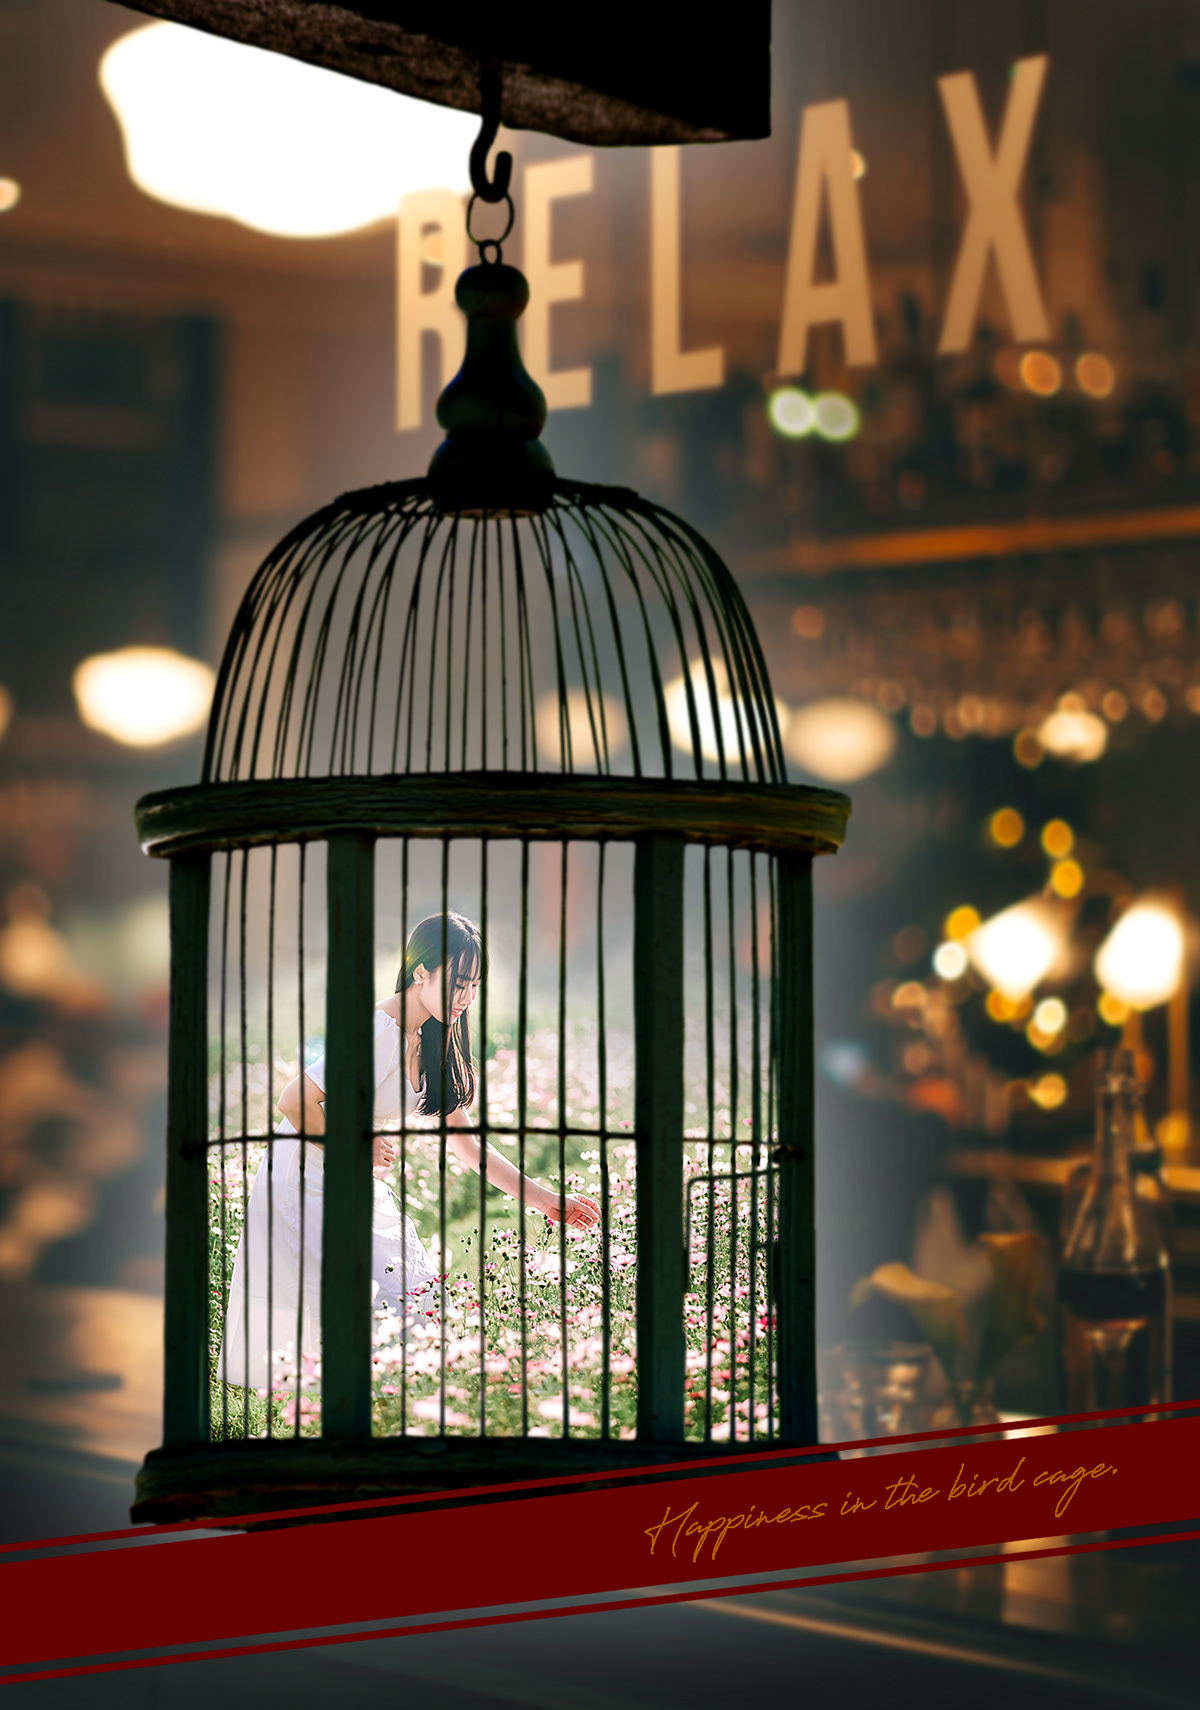 Bird Cage happiness Personal Work photo retouch